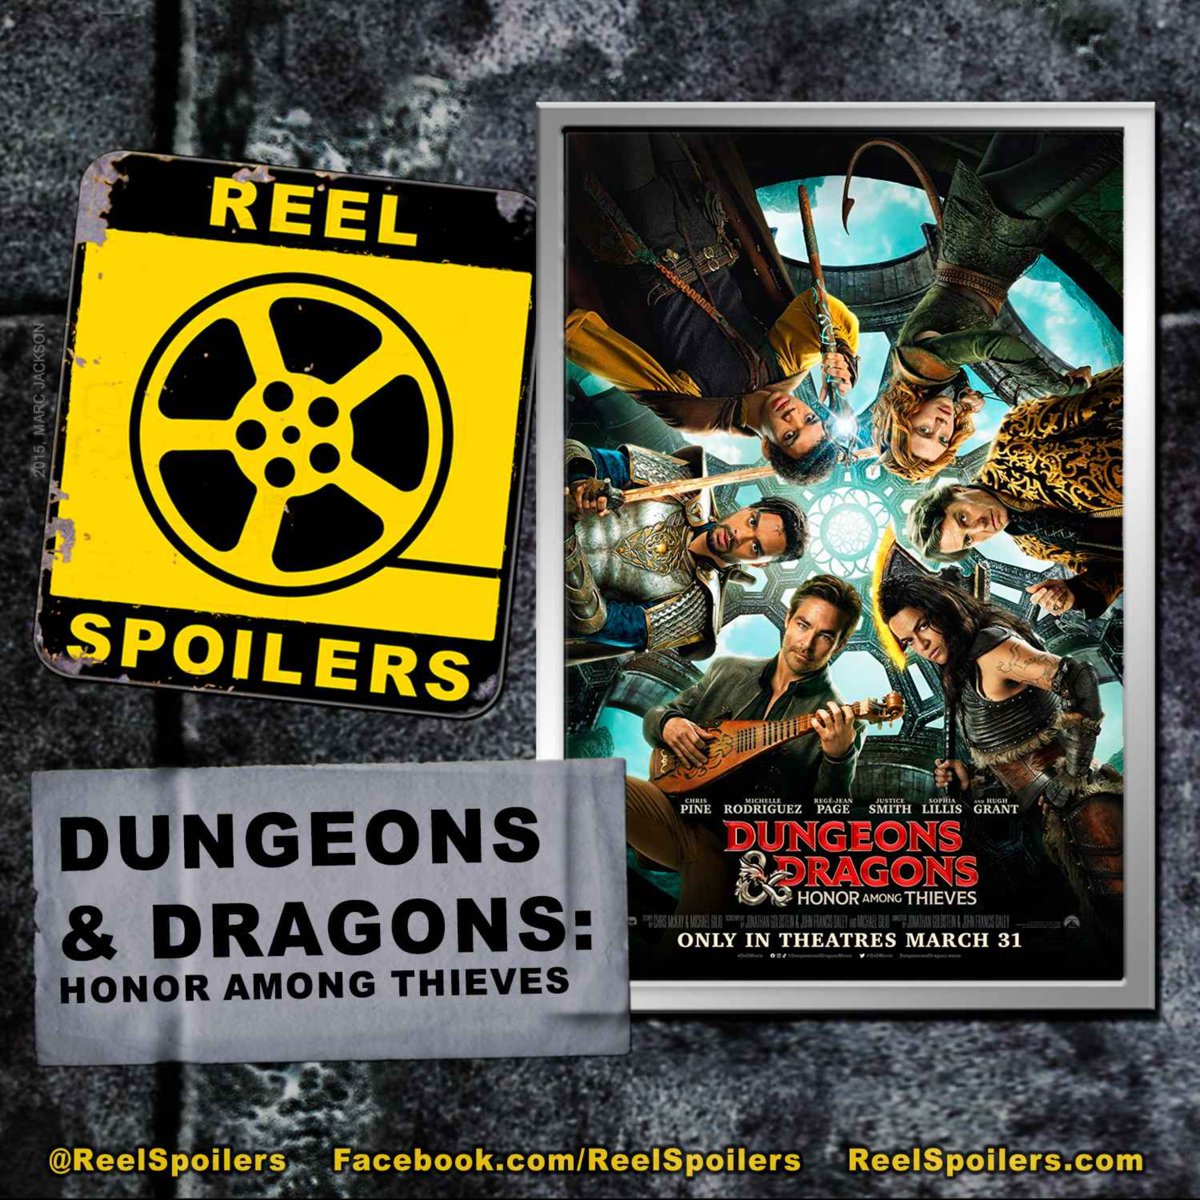 This week on @ReelSpoilers, find out if the new #DungeonsAndDragonsMovie rolls a Nat 20. Have you seen it? #HonorAmongThieves #Movies #podcasts WATCH: bit.ly/DandDmovie LISTEN: bit.ly/DandDpod